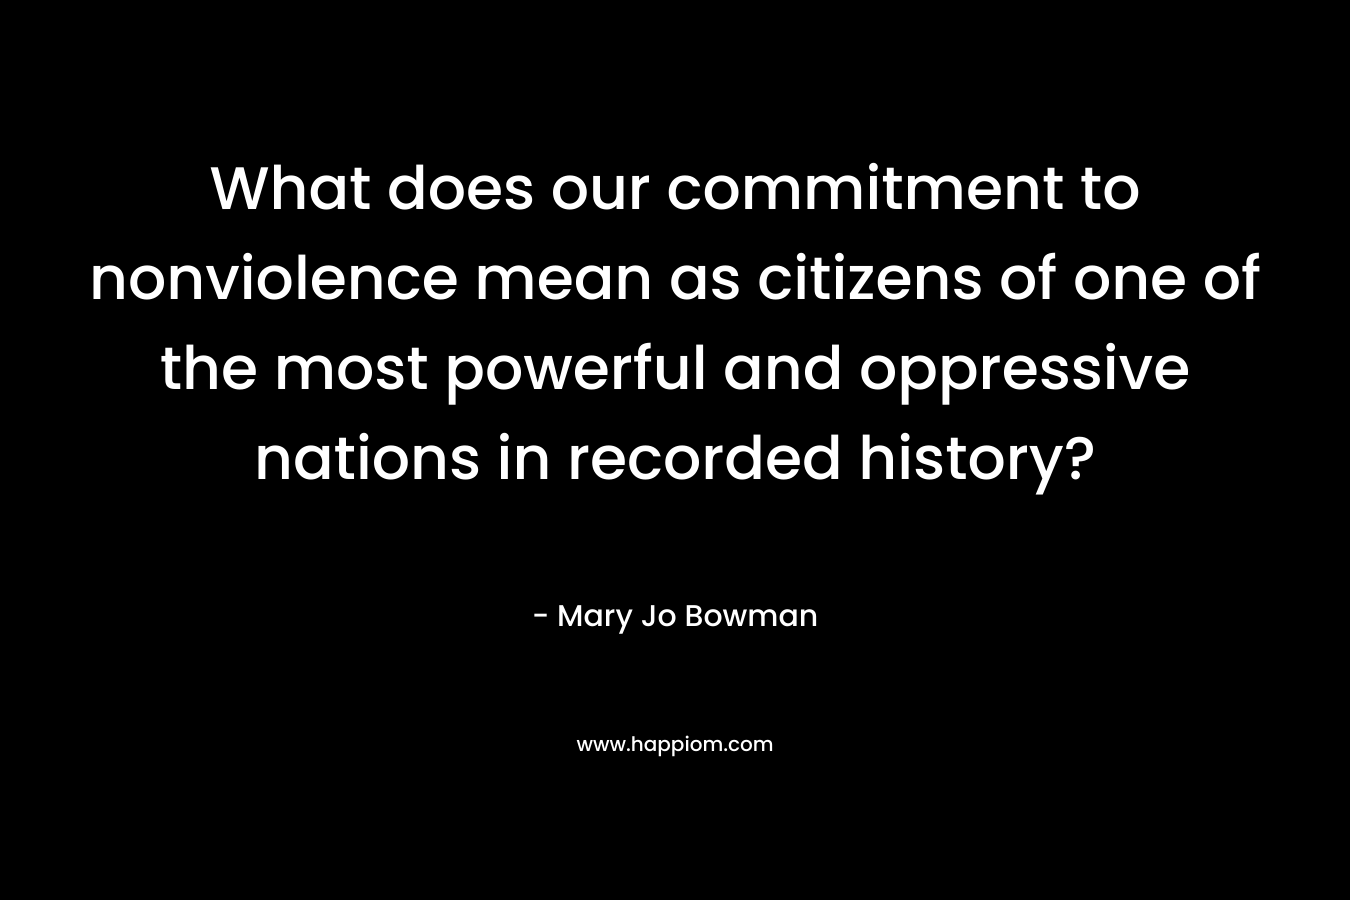 What does our commitment to nonviolence mean as citizens of one of the most powerful and oppressive nations in recorded history?